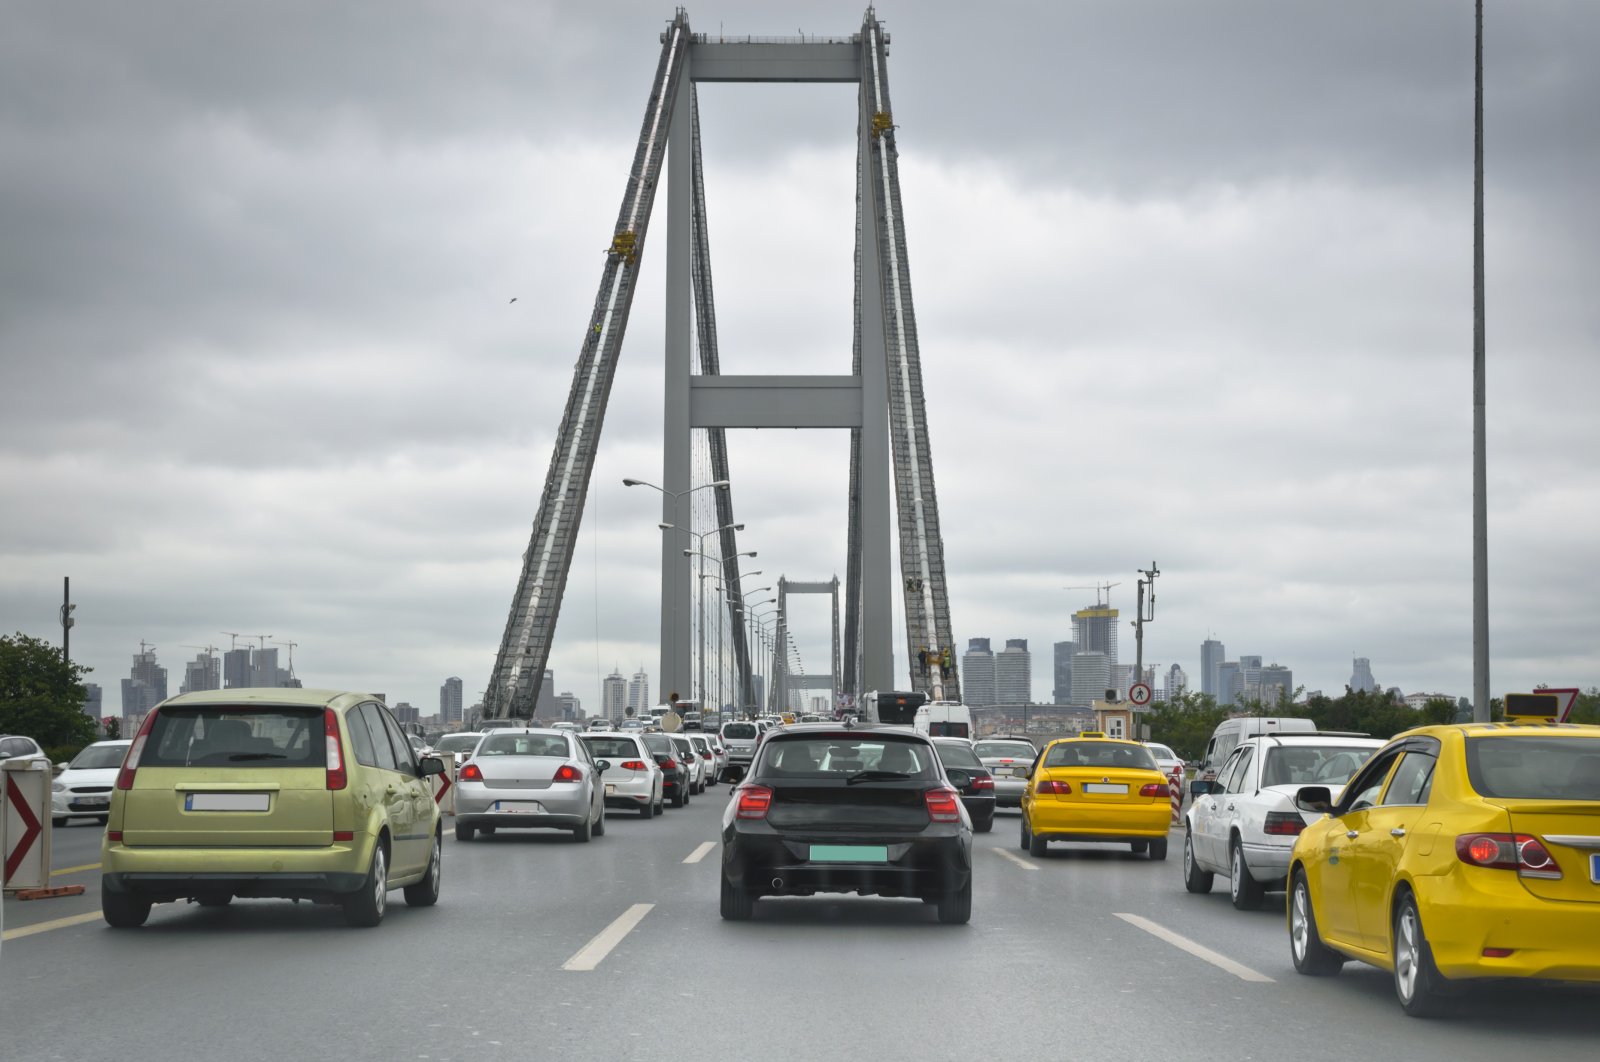 Having to retake your driving test as a foreigner can be daunting and time-consuming, but driving with an illegal license can incur heavy fines in Turkey.